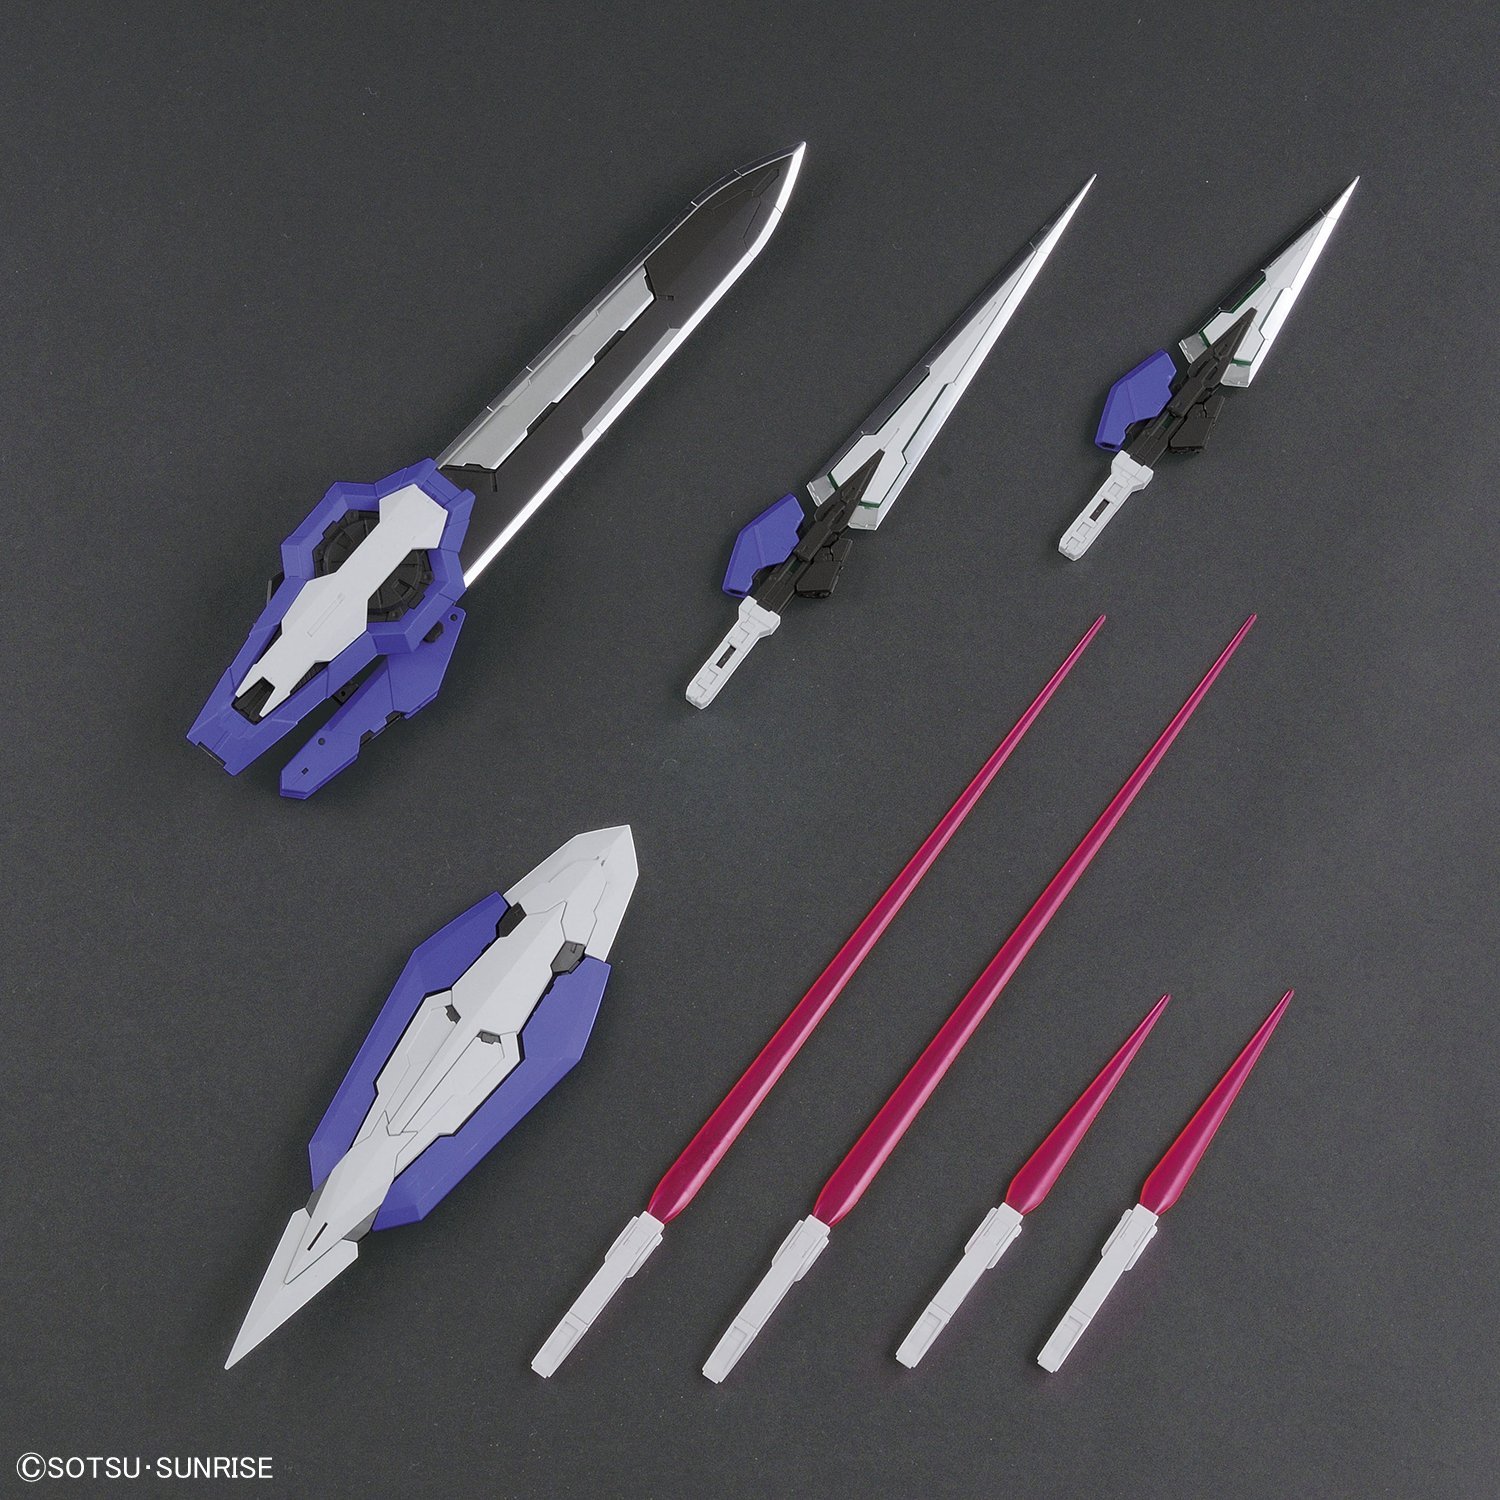 Bandai 1/60 PG exia picture 11 - list of sword & accessories [00 10 anniversary]